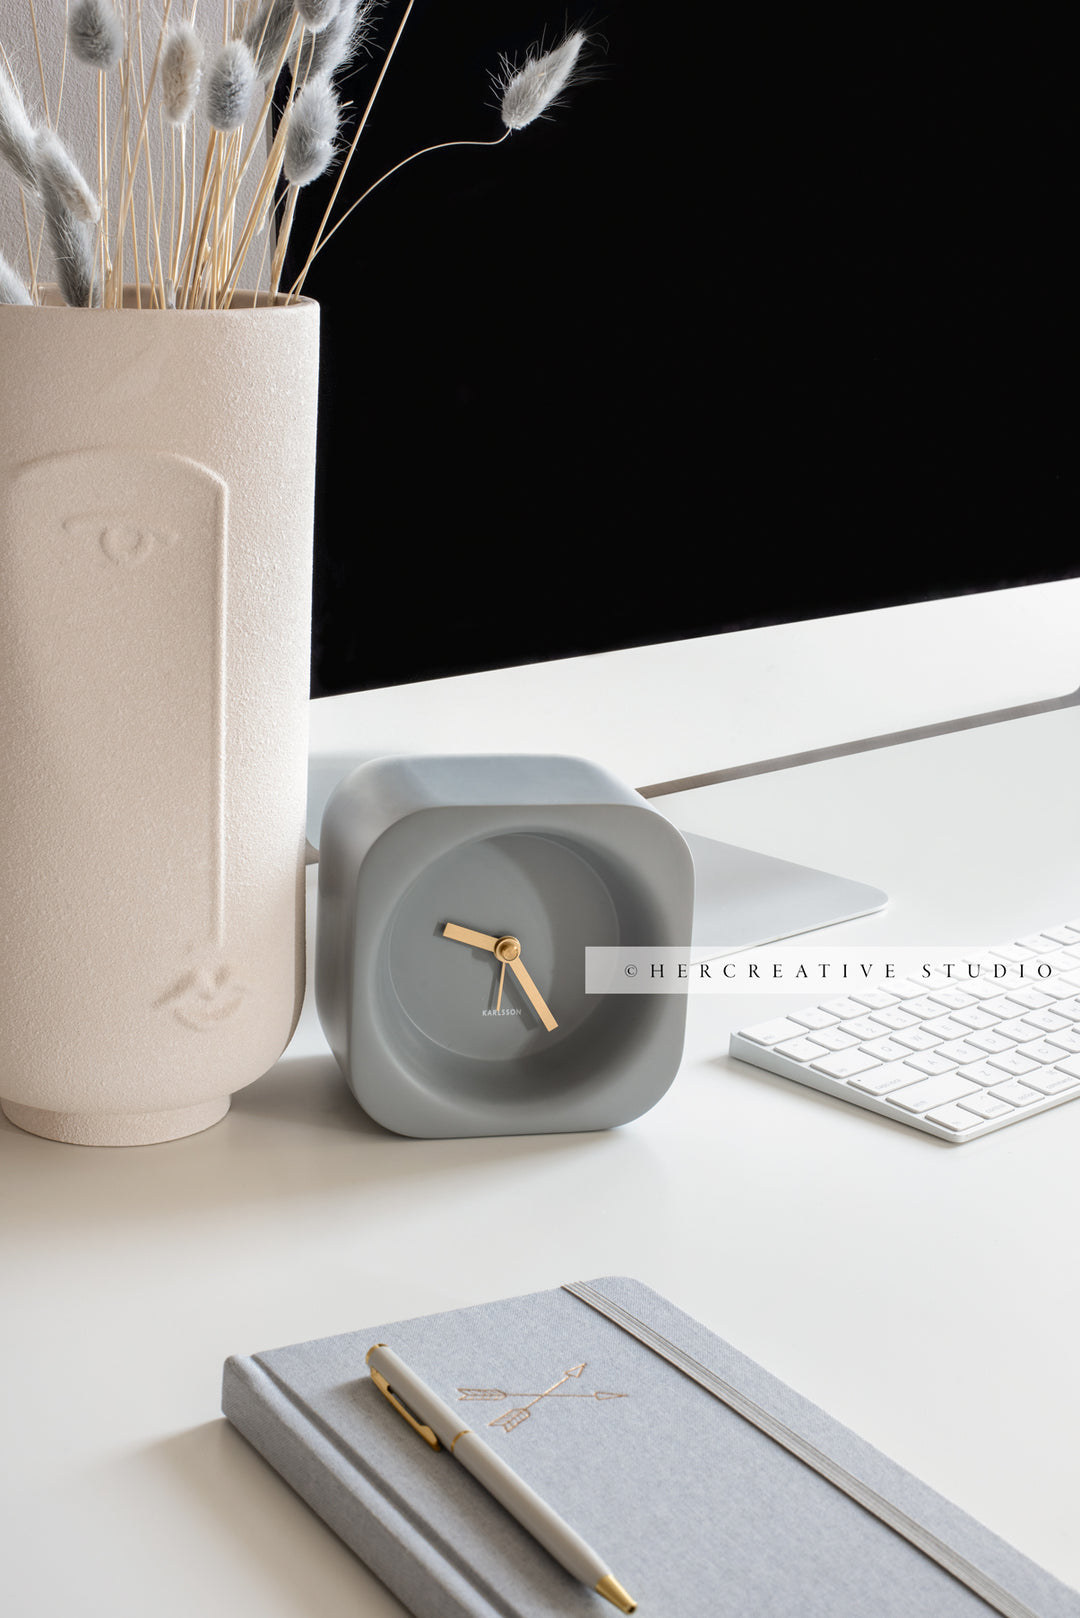 Clock and Notebook on Grey Workspace. Stock Image